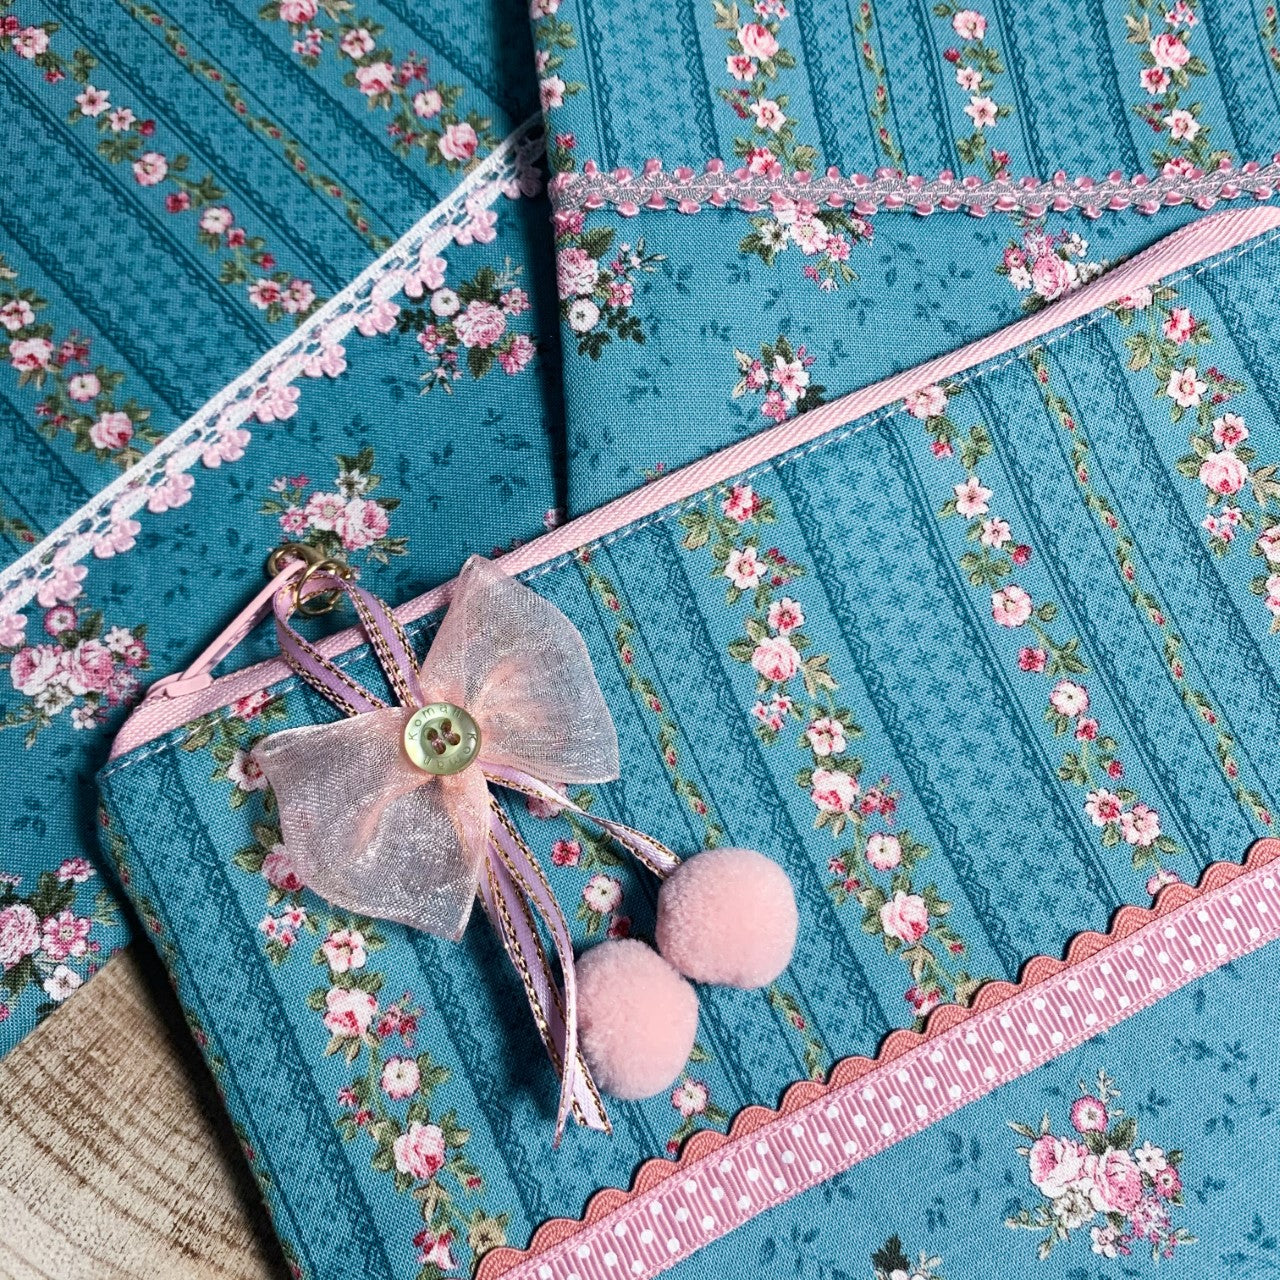 Teal and pink vintage style pouch